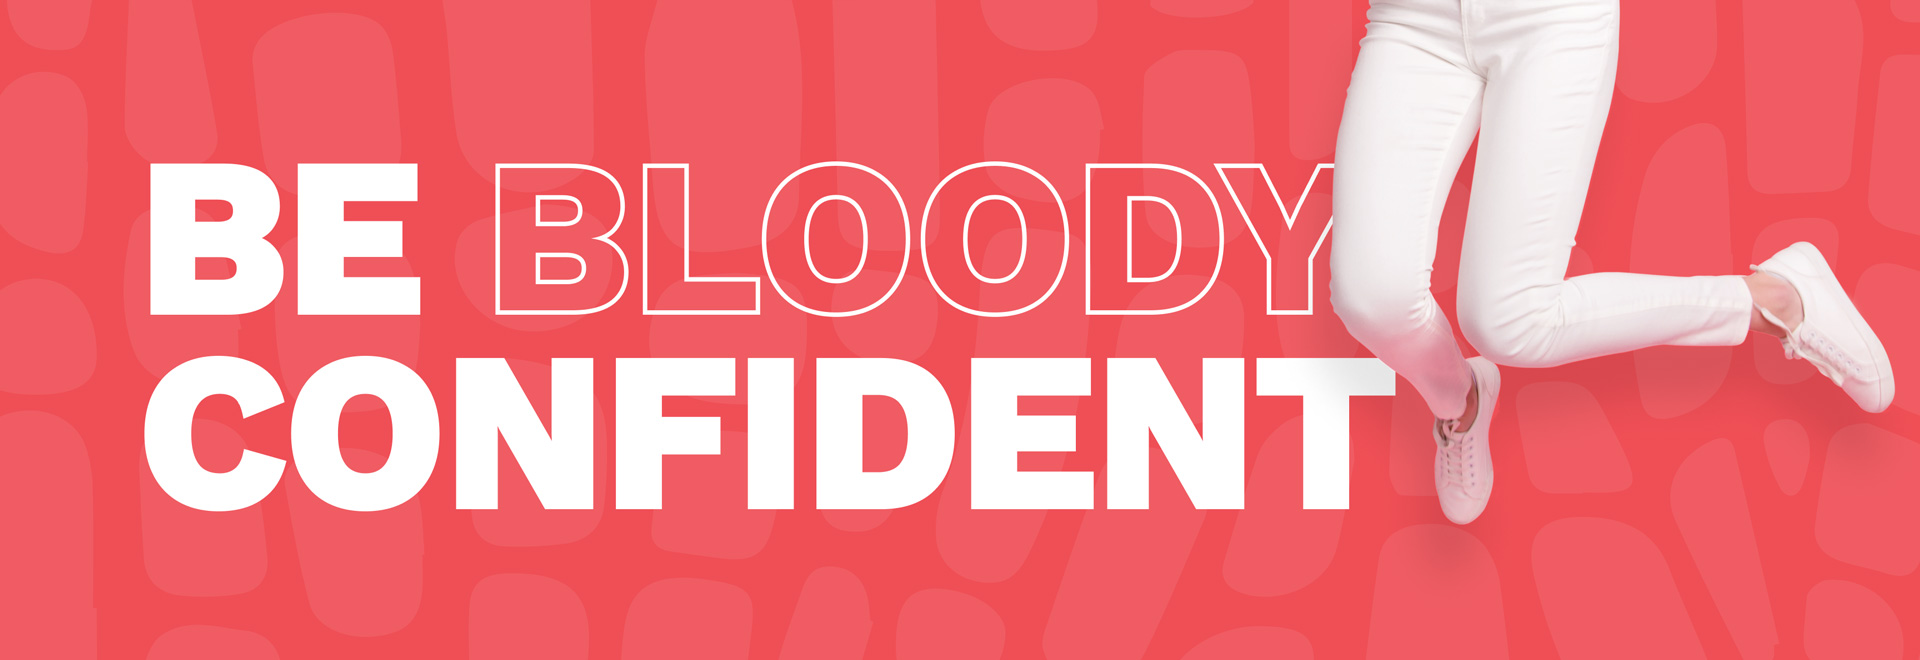 Text: Be bloody confident. White jeans on red background